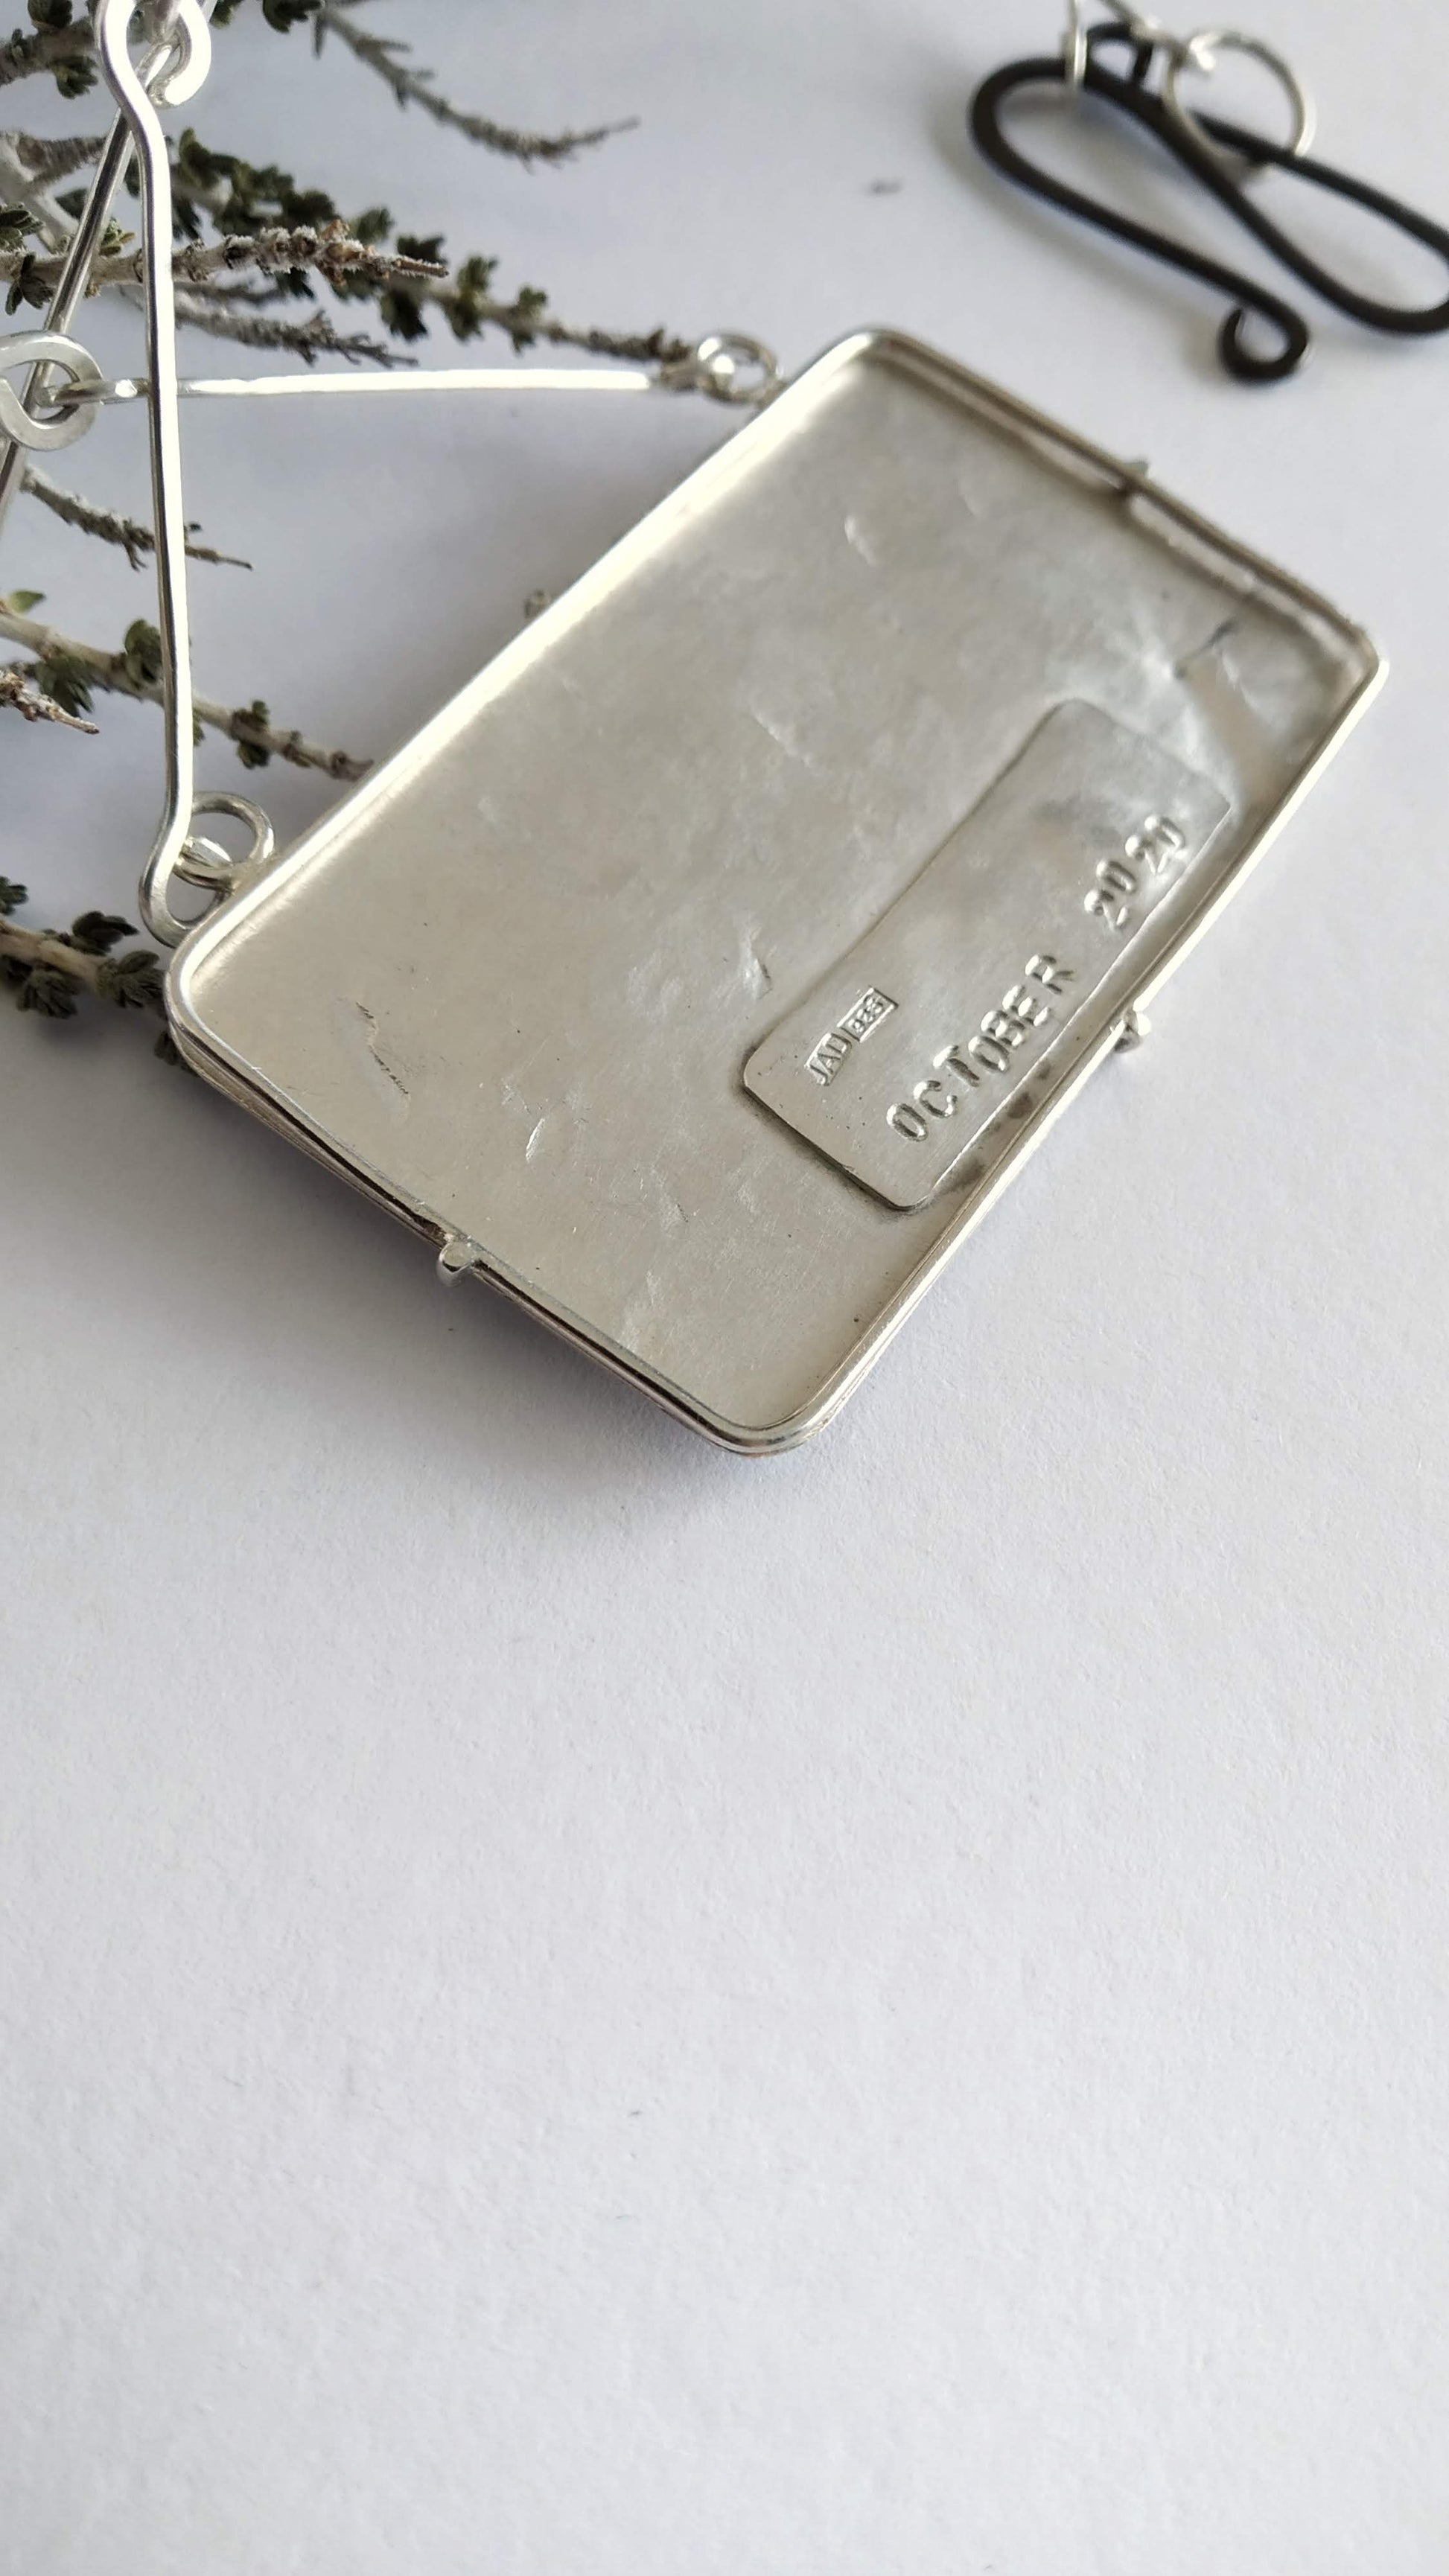 Back of a silver pendant with imprint "October 2020". Silver handmade chain and oxidized silver clasp